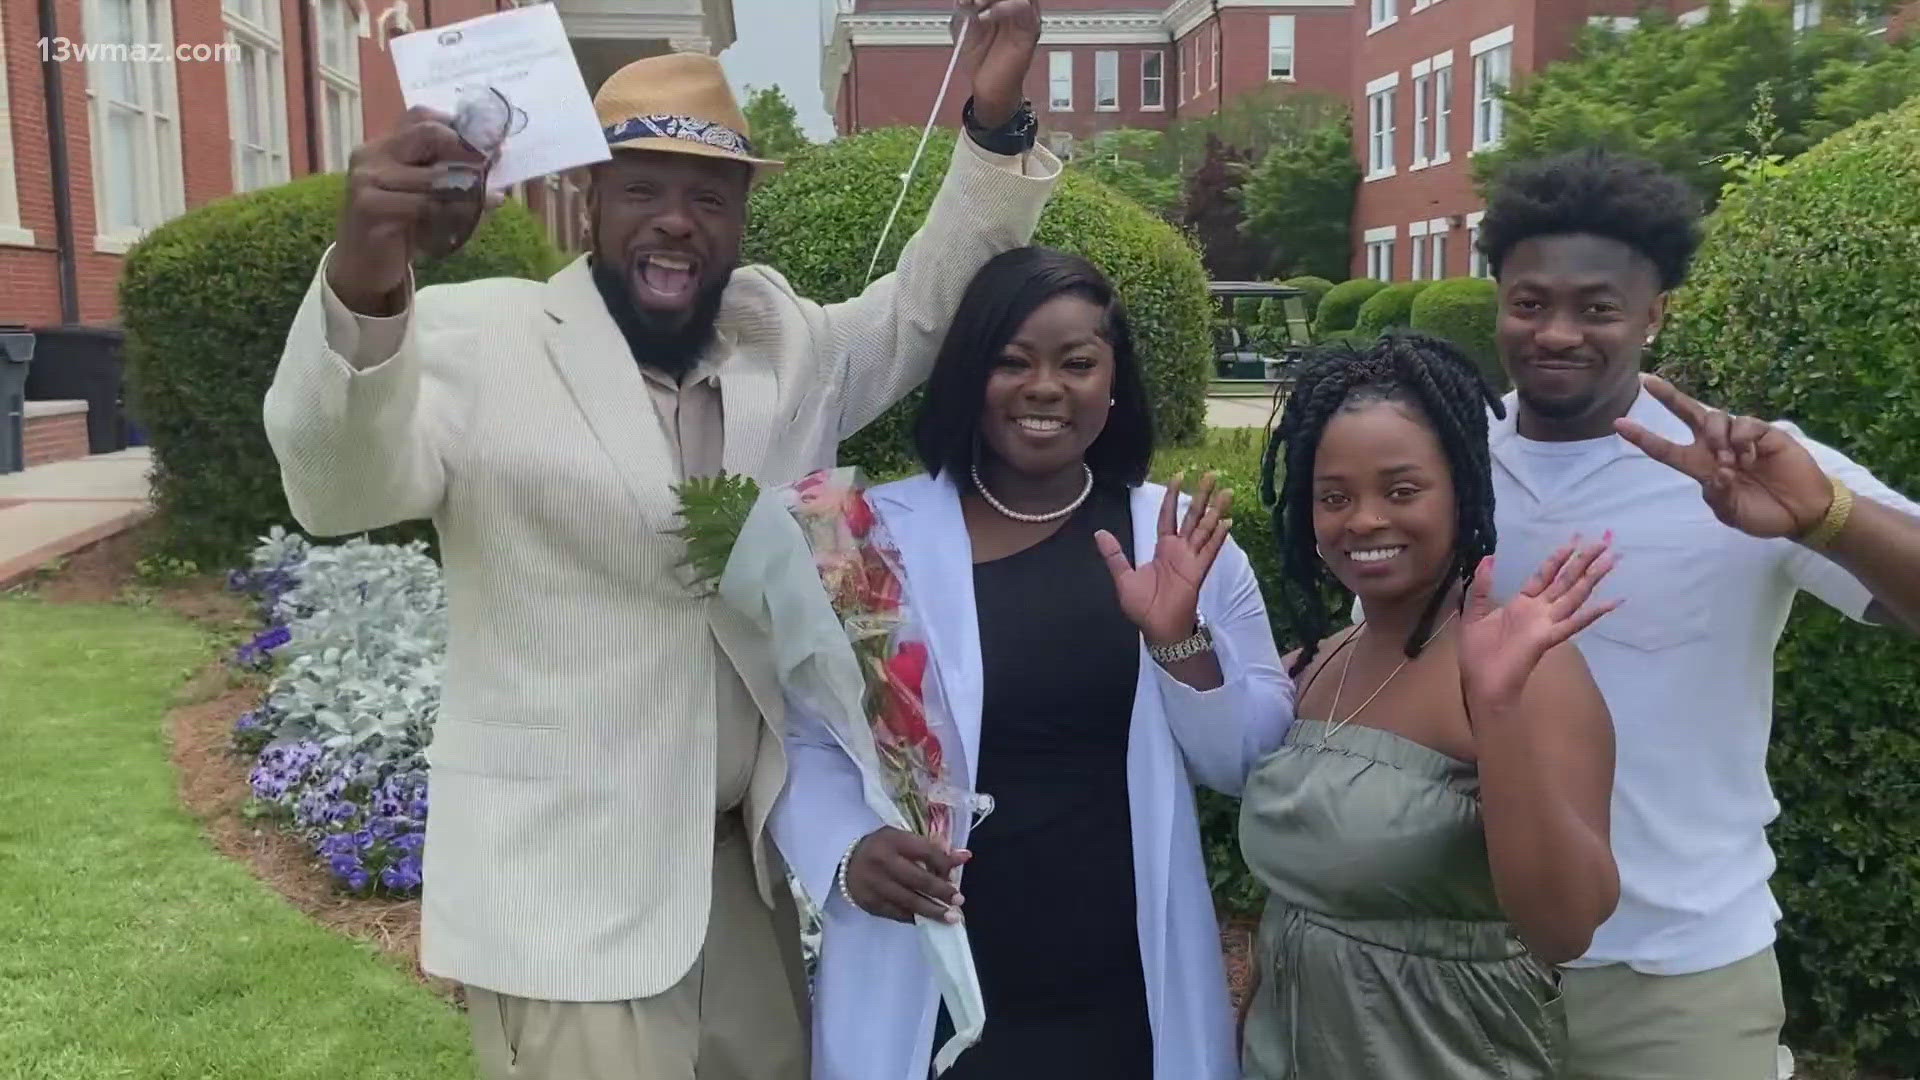 High school seniors who lost their graduation are excited to finally get to walk across the stage for the first time.